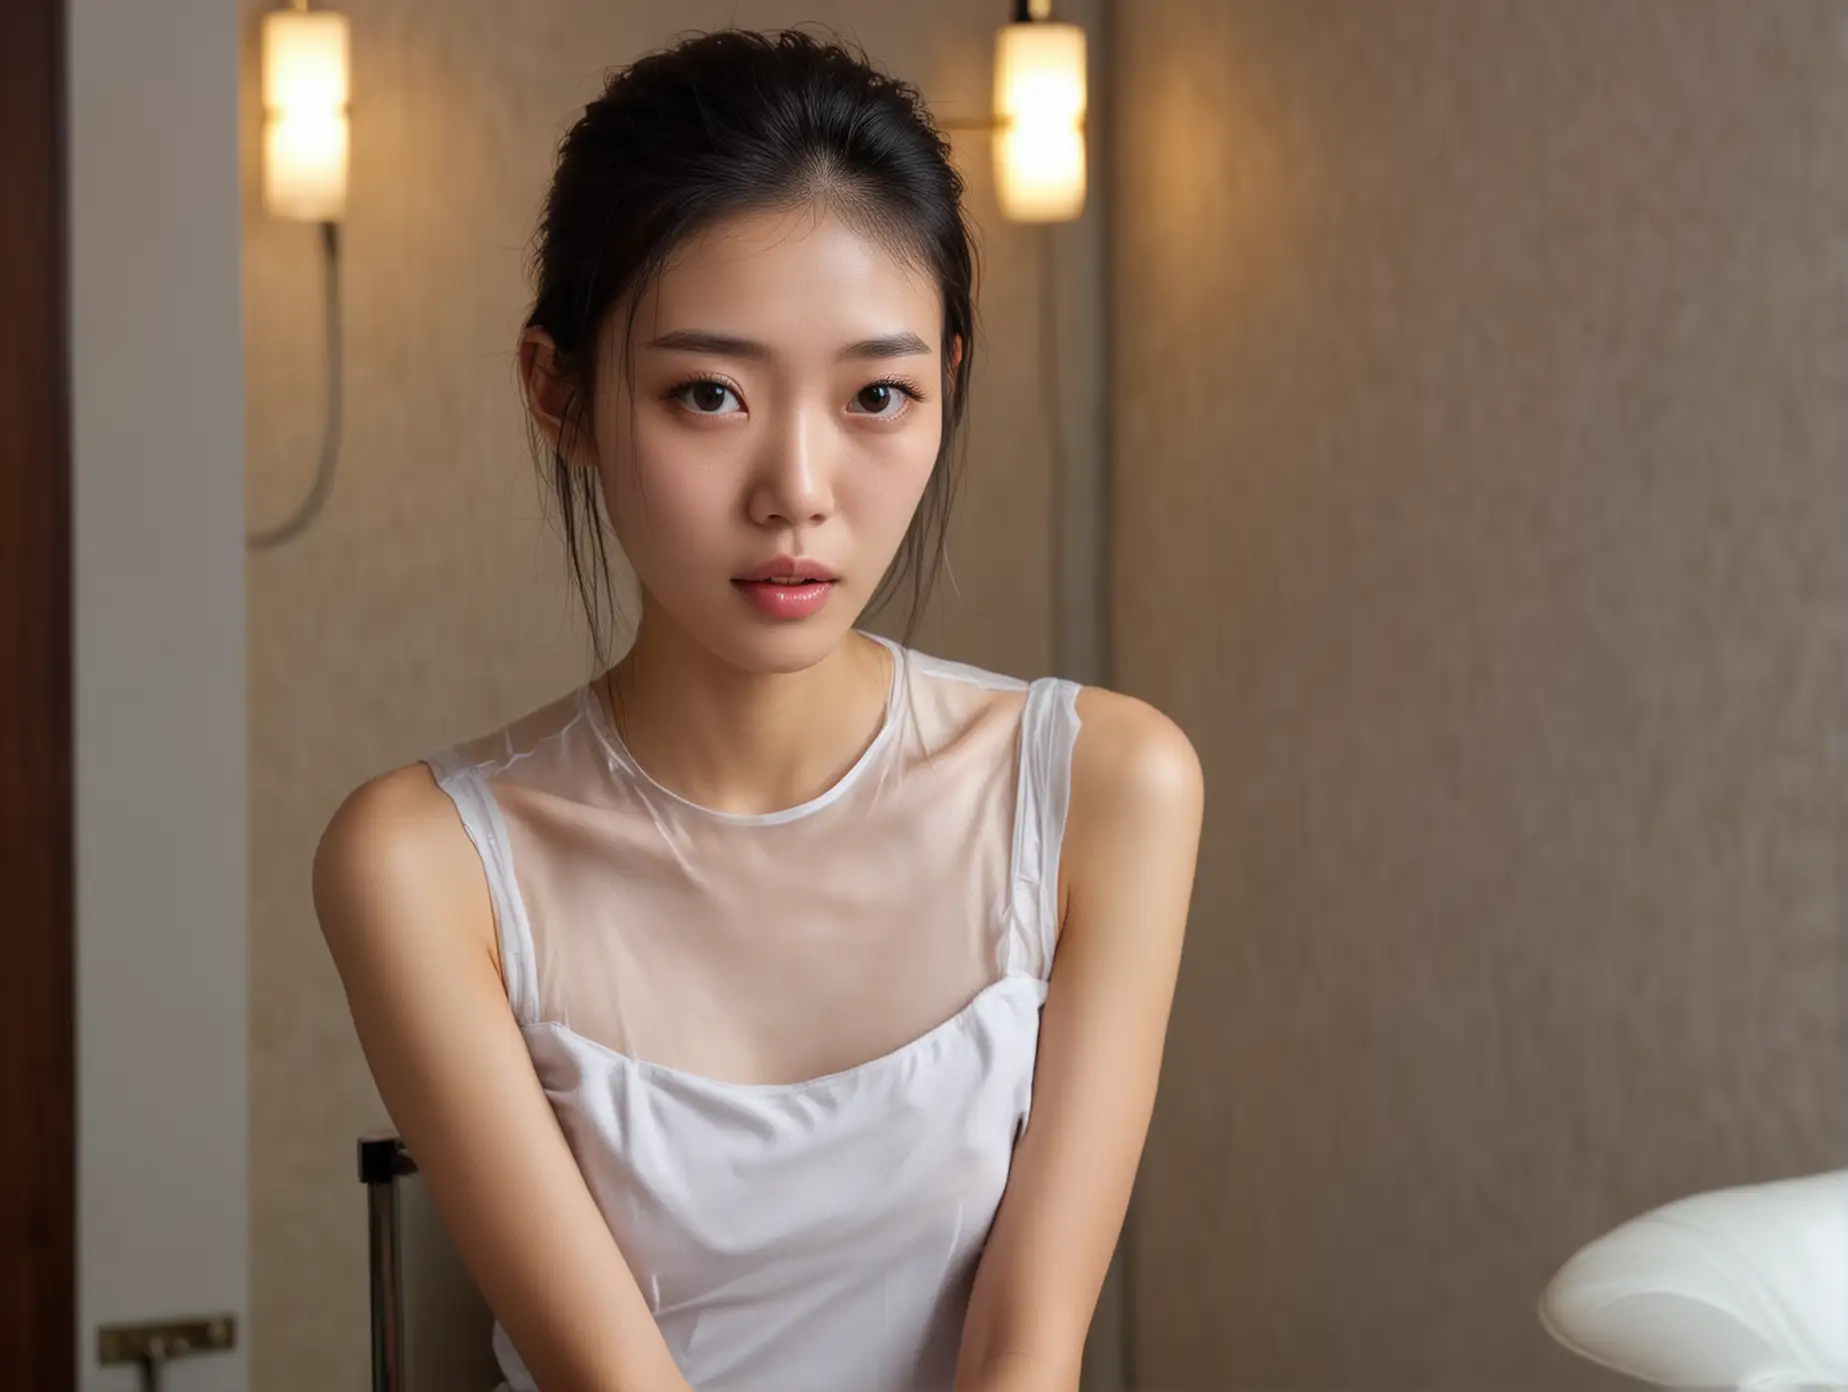 angelic sweet shy very skinny young Chinese stylist without makeup in an upscale salon, blushing and stunned, her mouth agape, staring at the camera with a desperate pleading look.